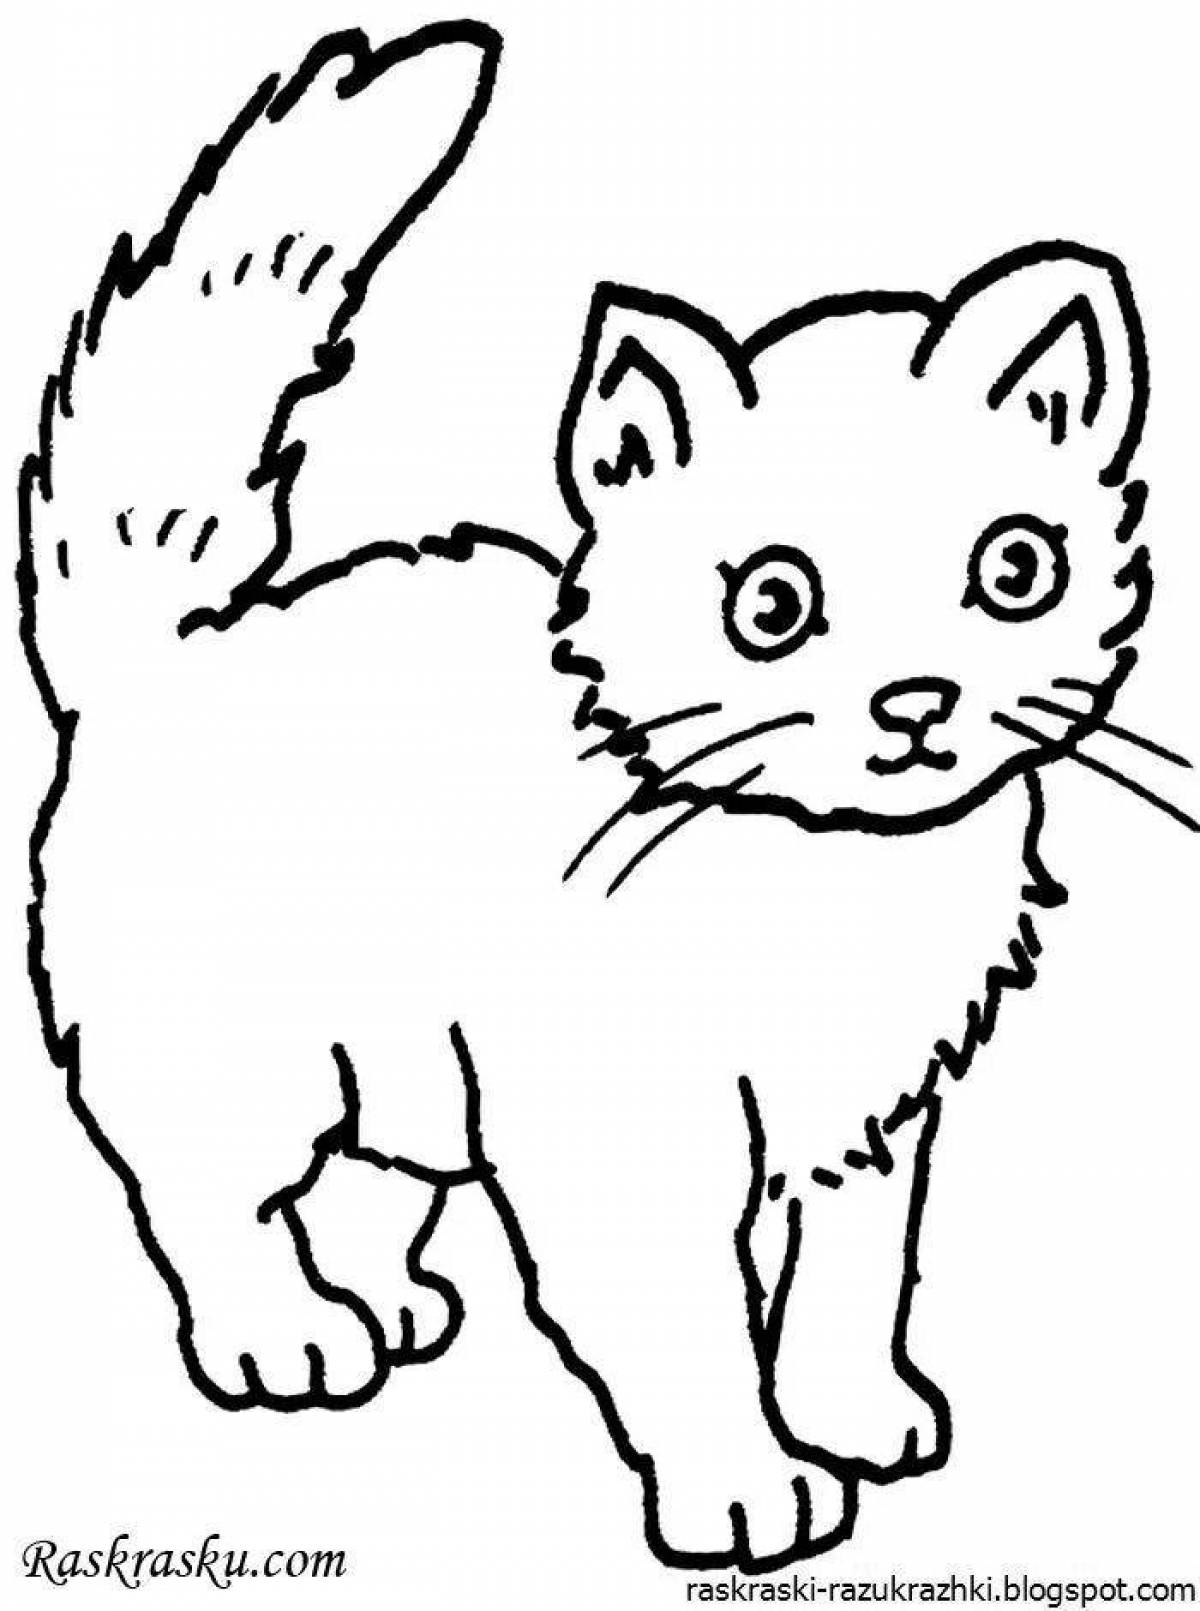 Adorable cat coloring book for kids